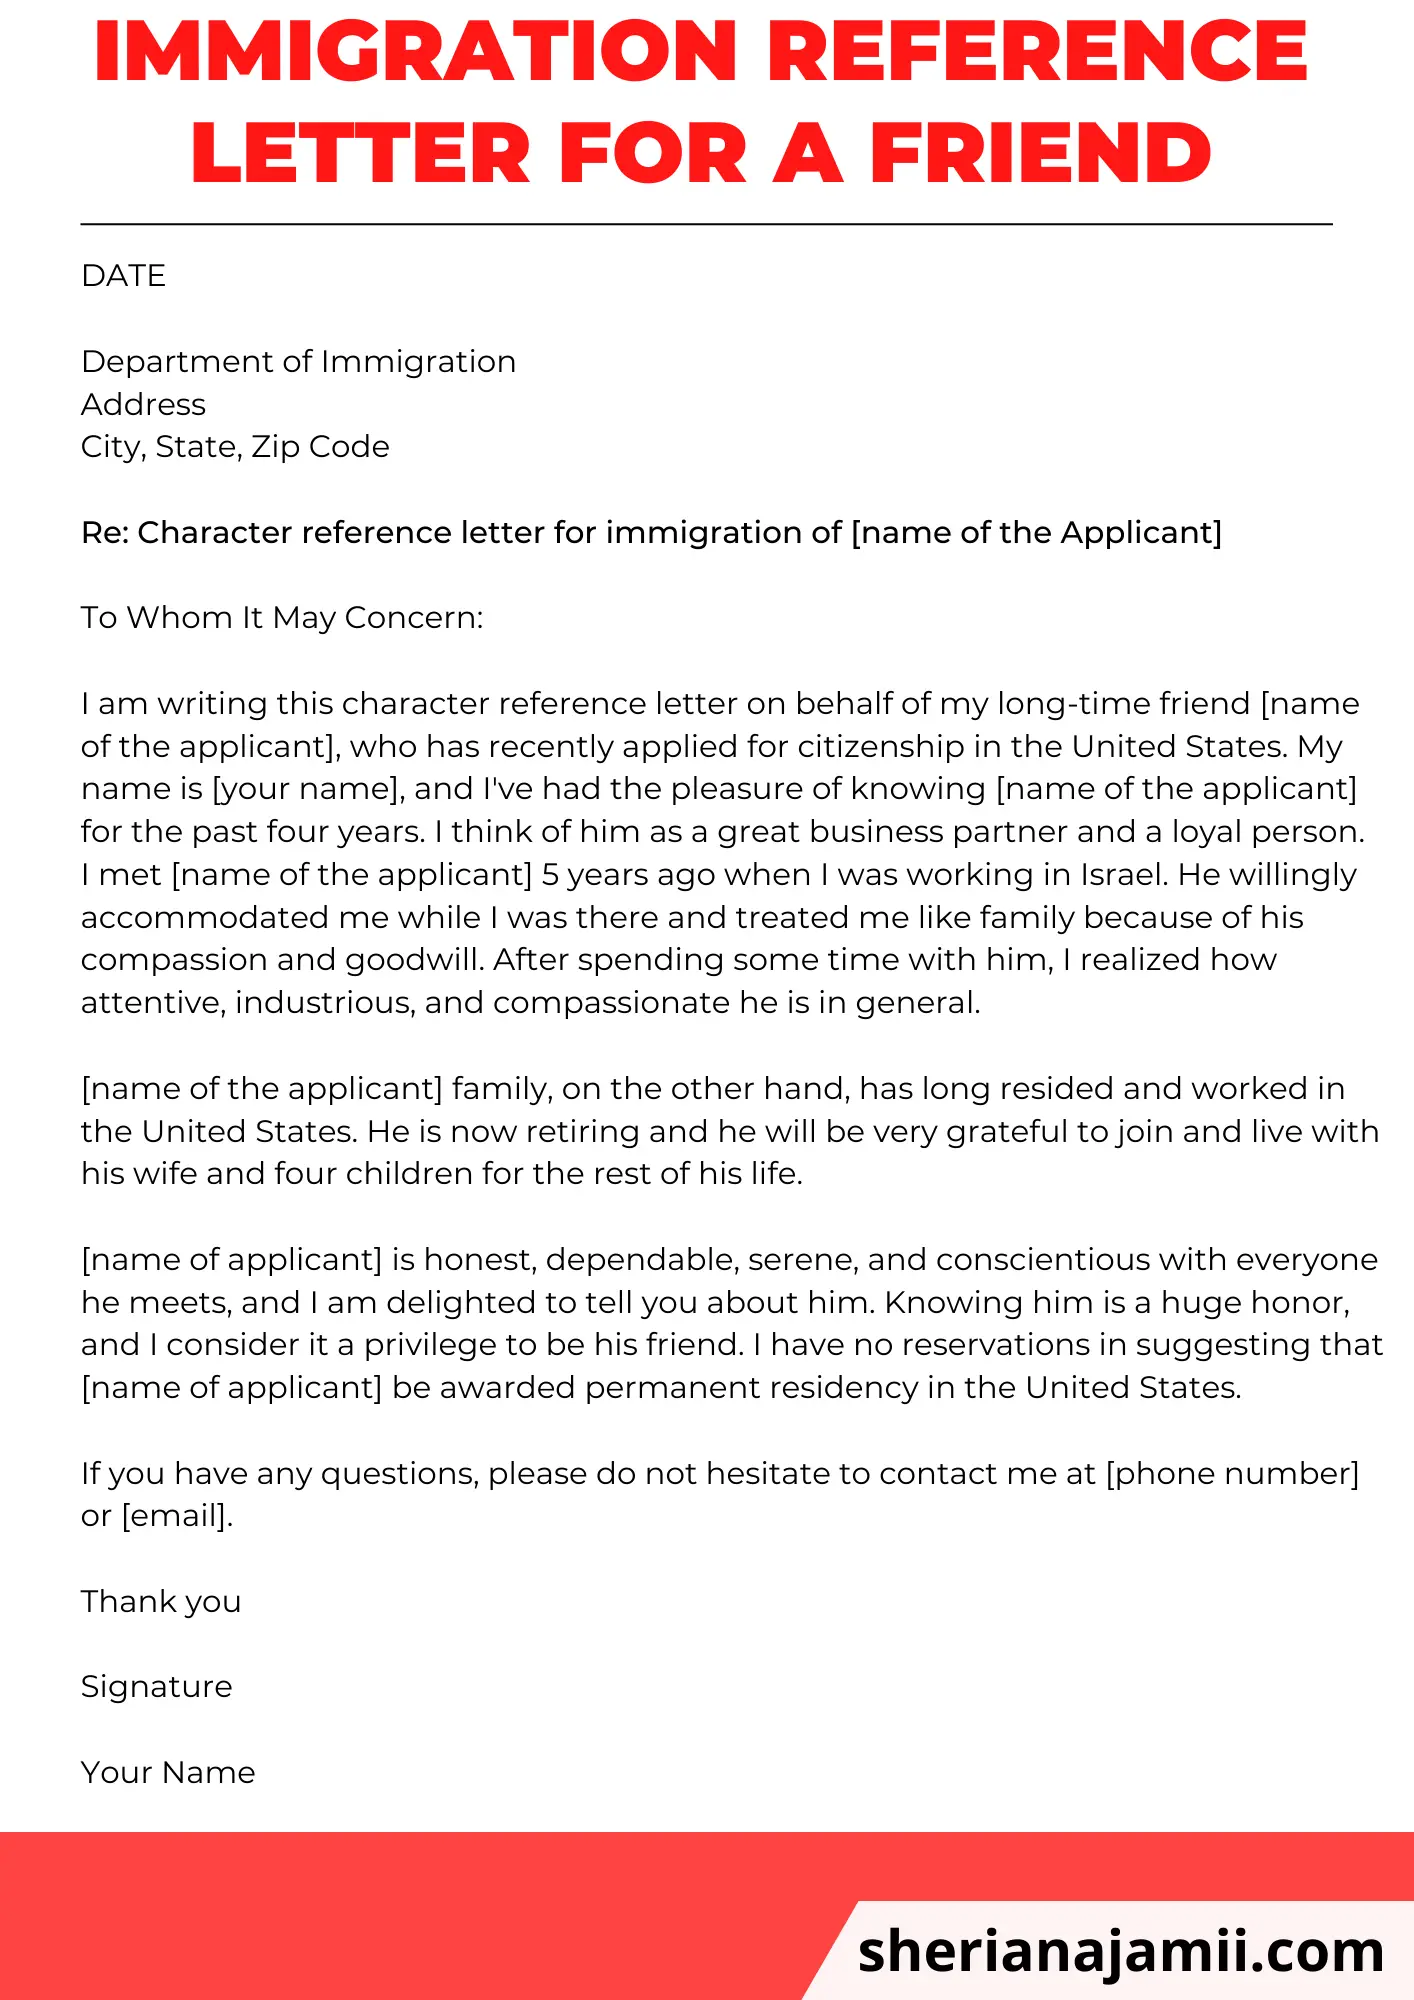 Immigration reference letter for a friend